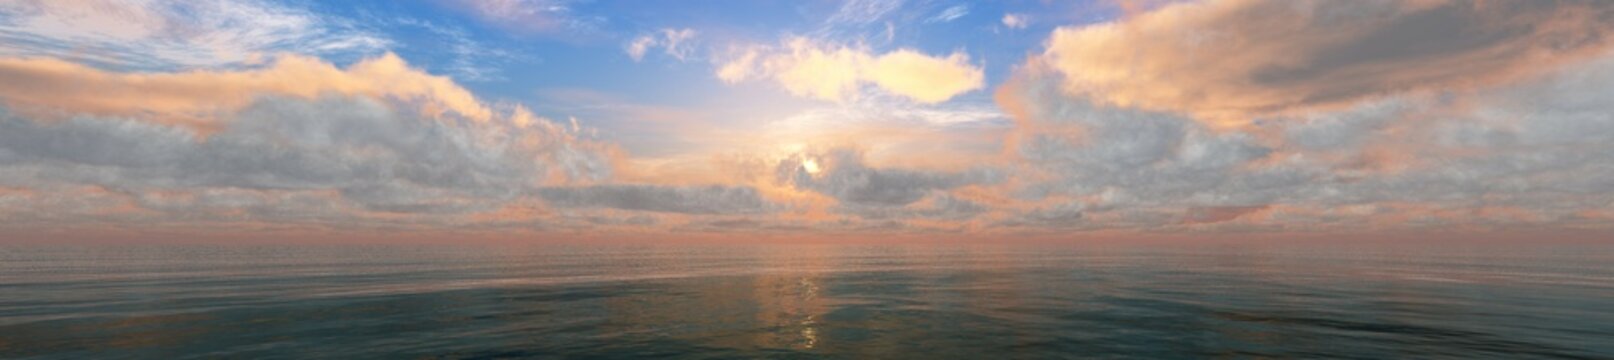 panorama of the ocean sunset, sea sunset, the sun in the clouds over the water, 3D rendering